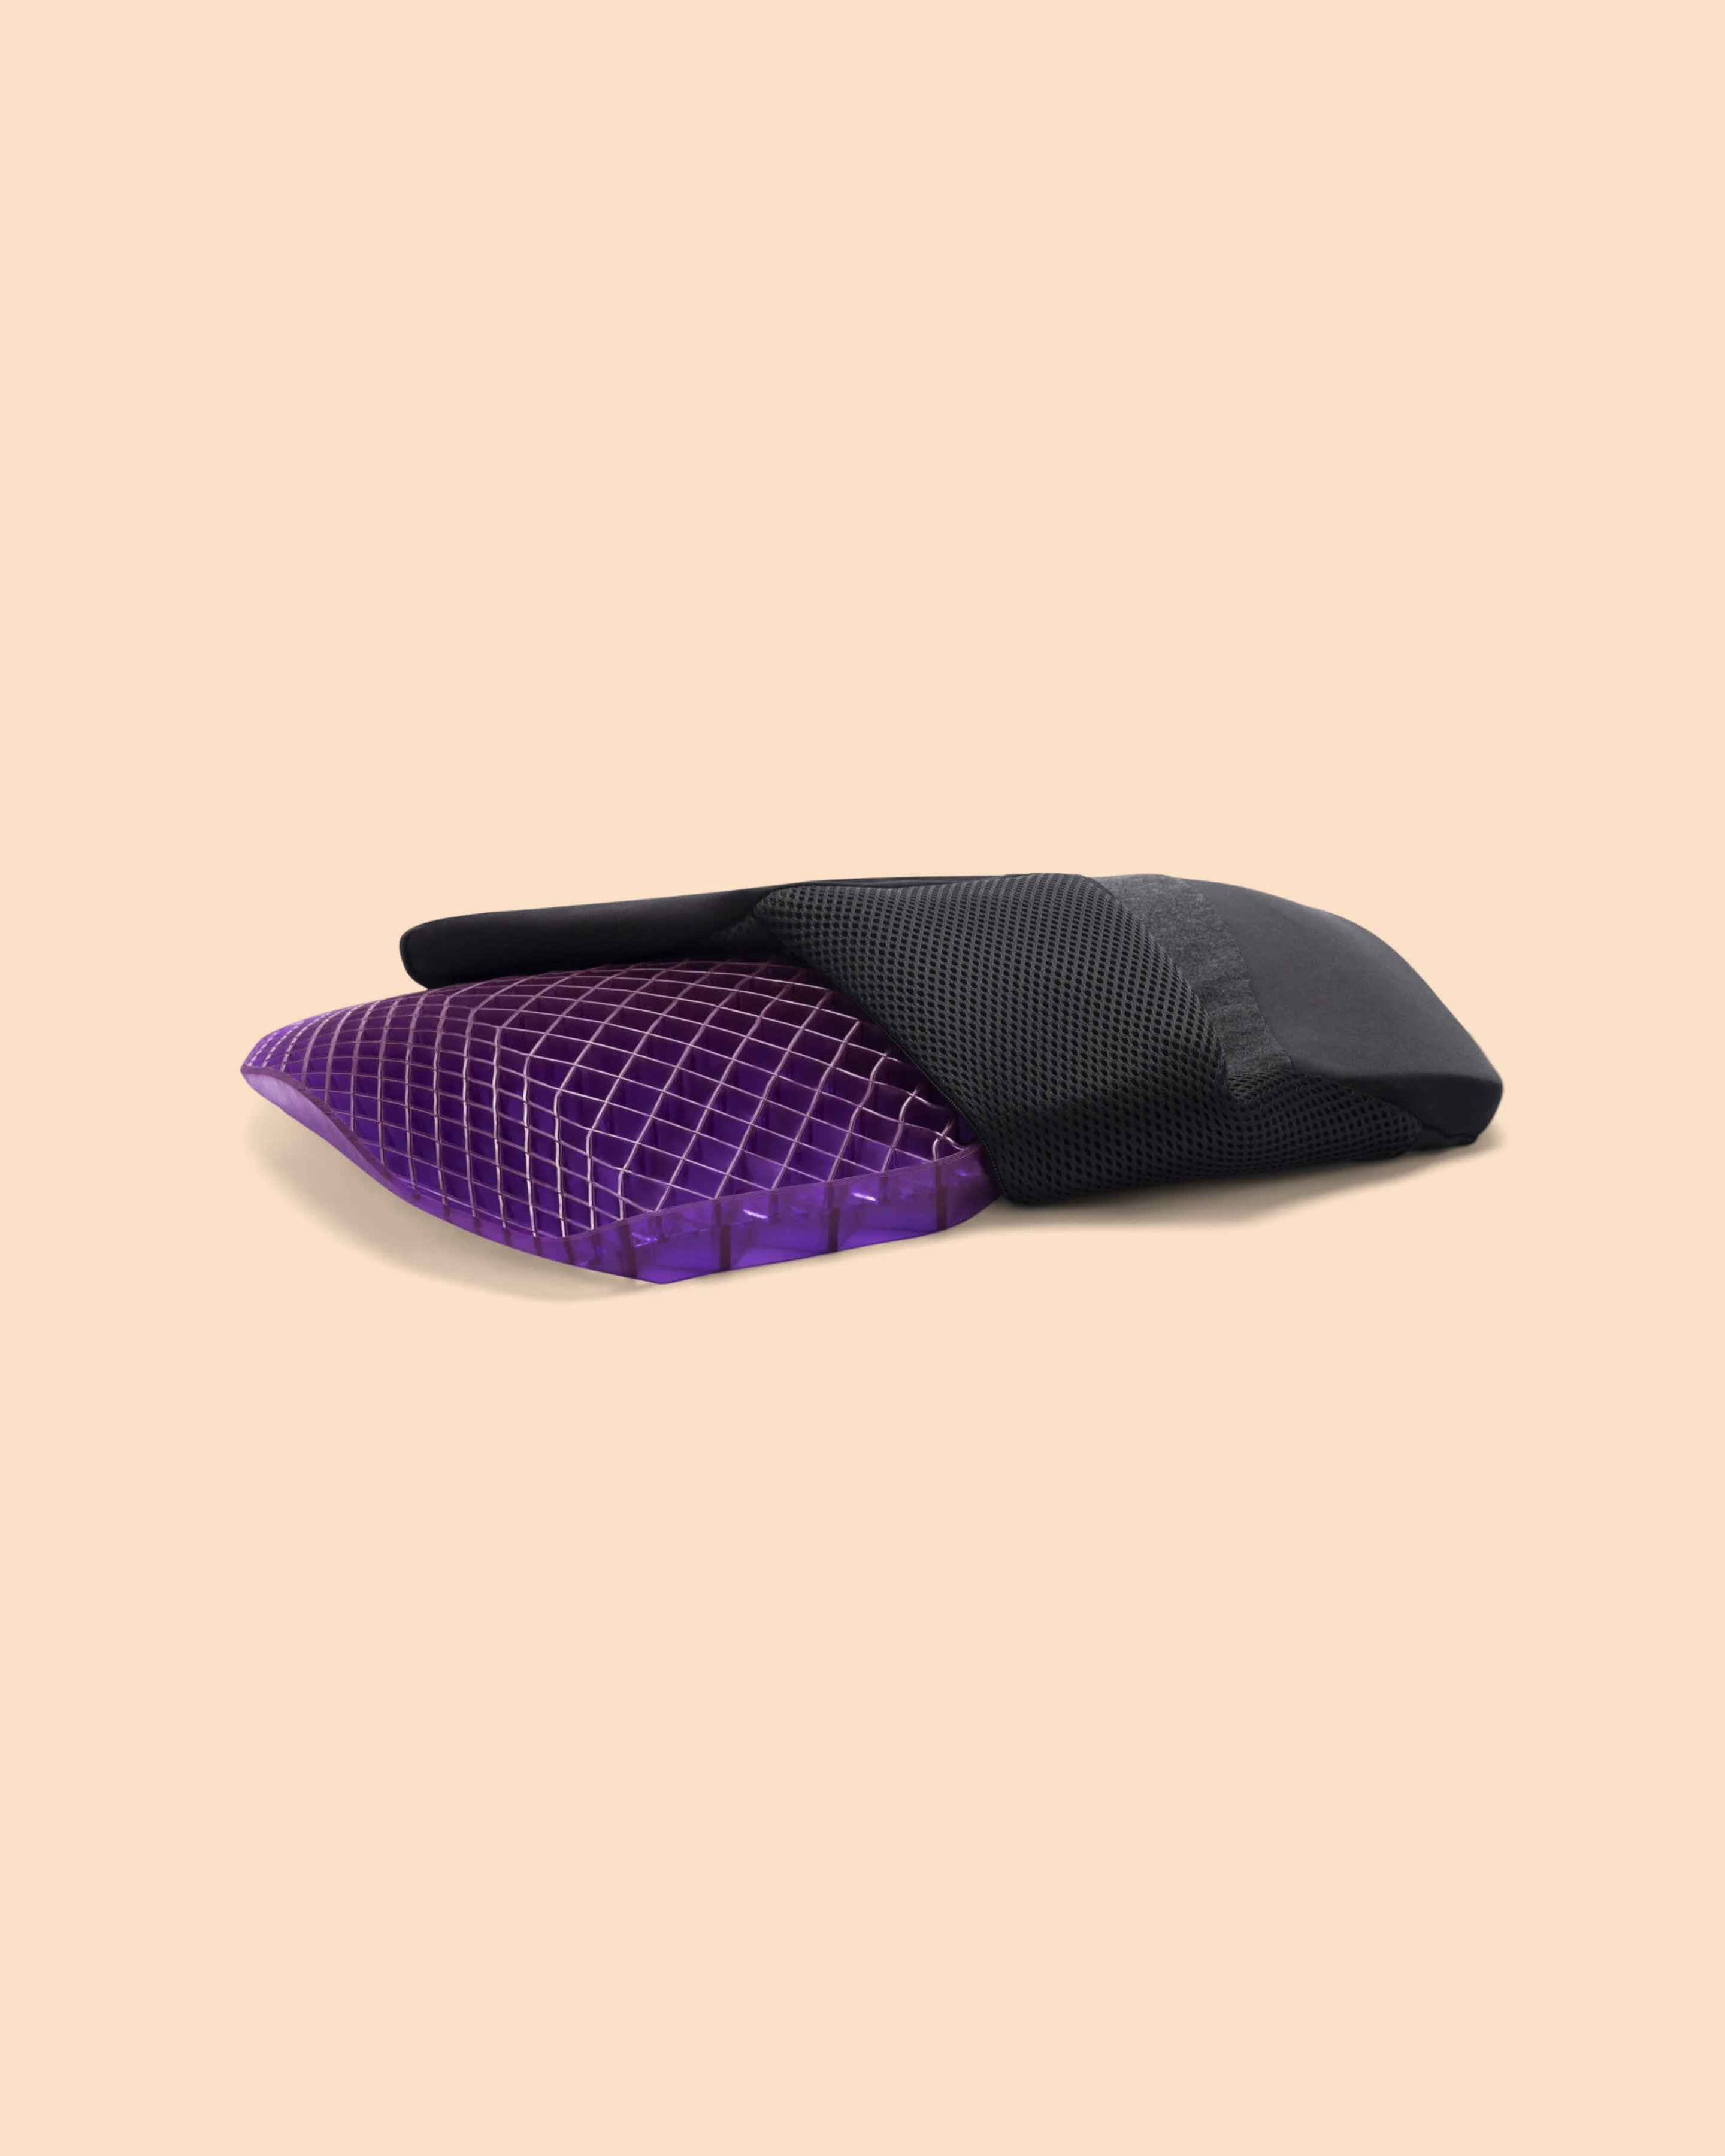 Purple Simply Seat Cushion Review